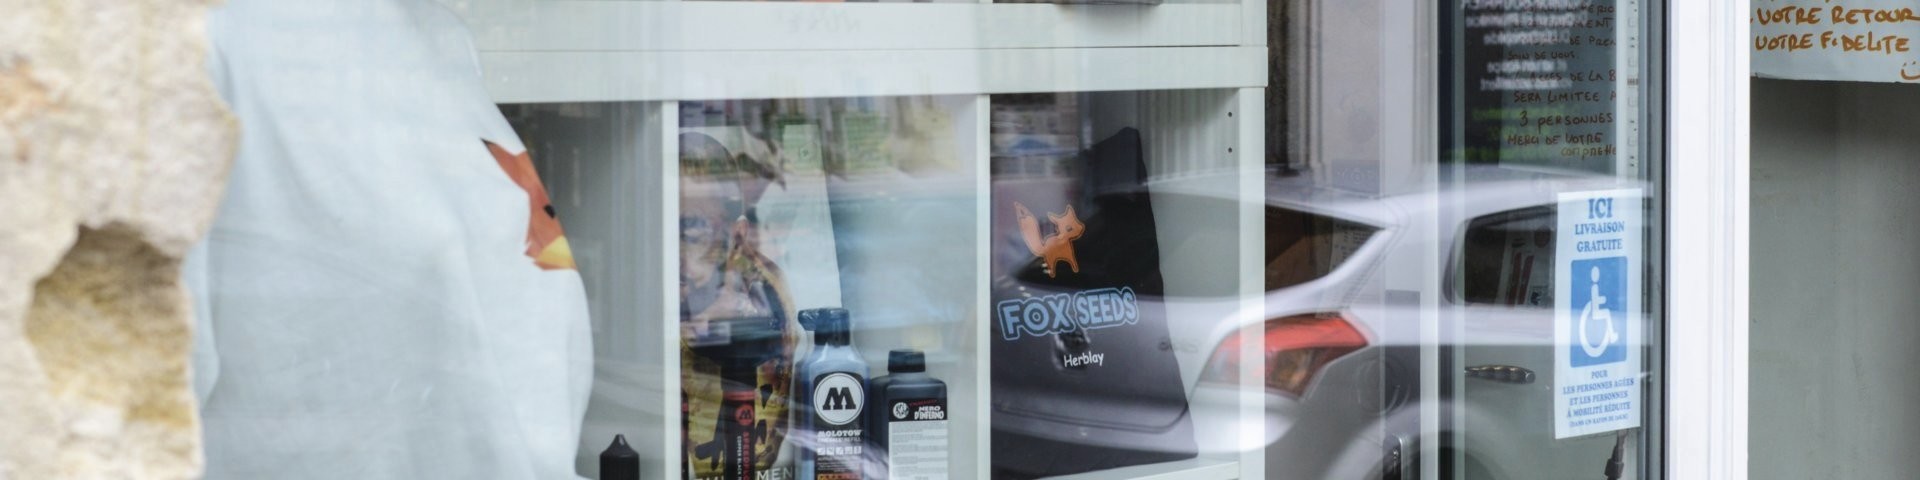 Boutique FOXSEED - Mon commerce  Herblay